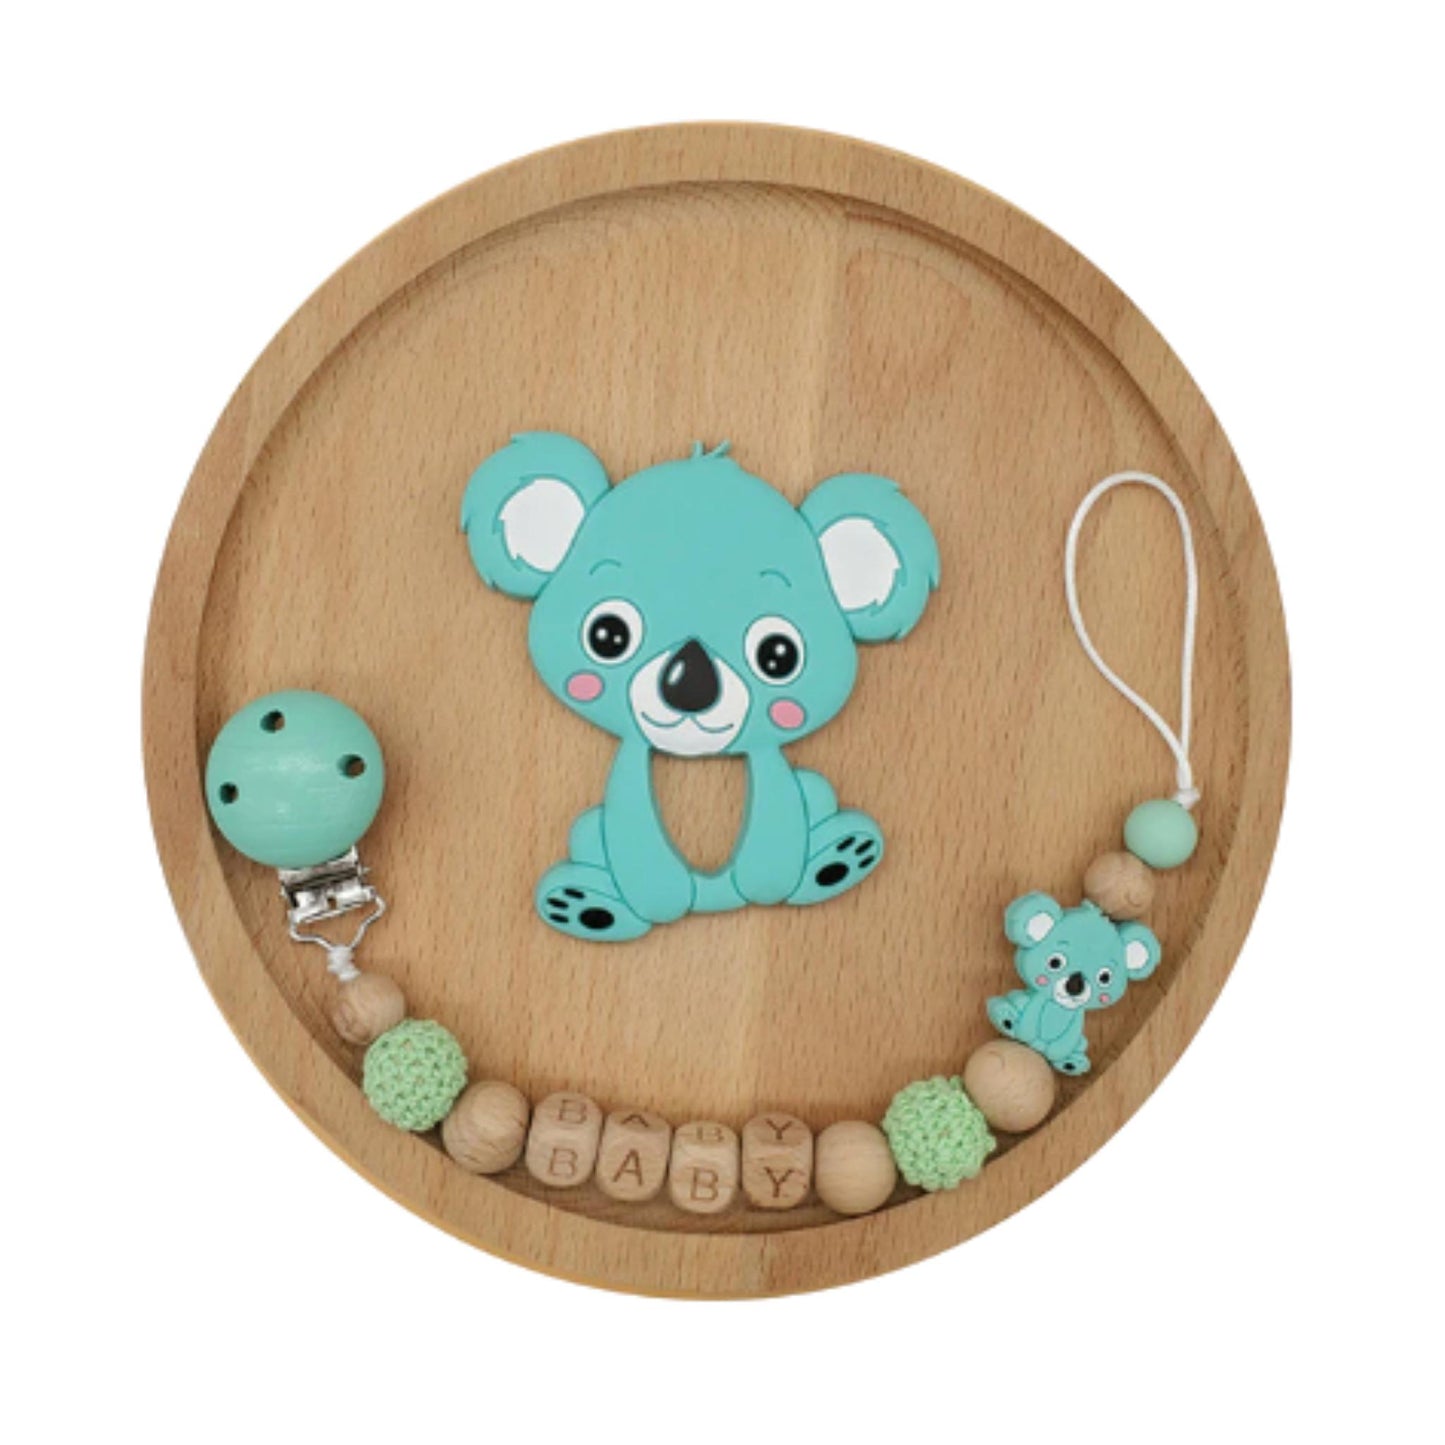 Wooden Personalized Pacifier Clip with Koala Teether-Pacifier clips-Hunny Bubba Kids